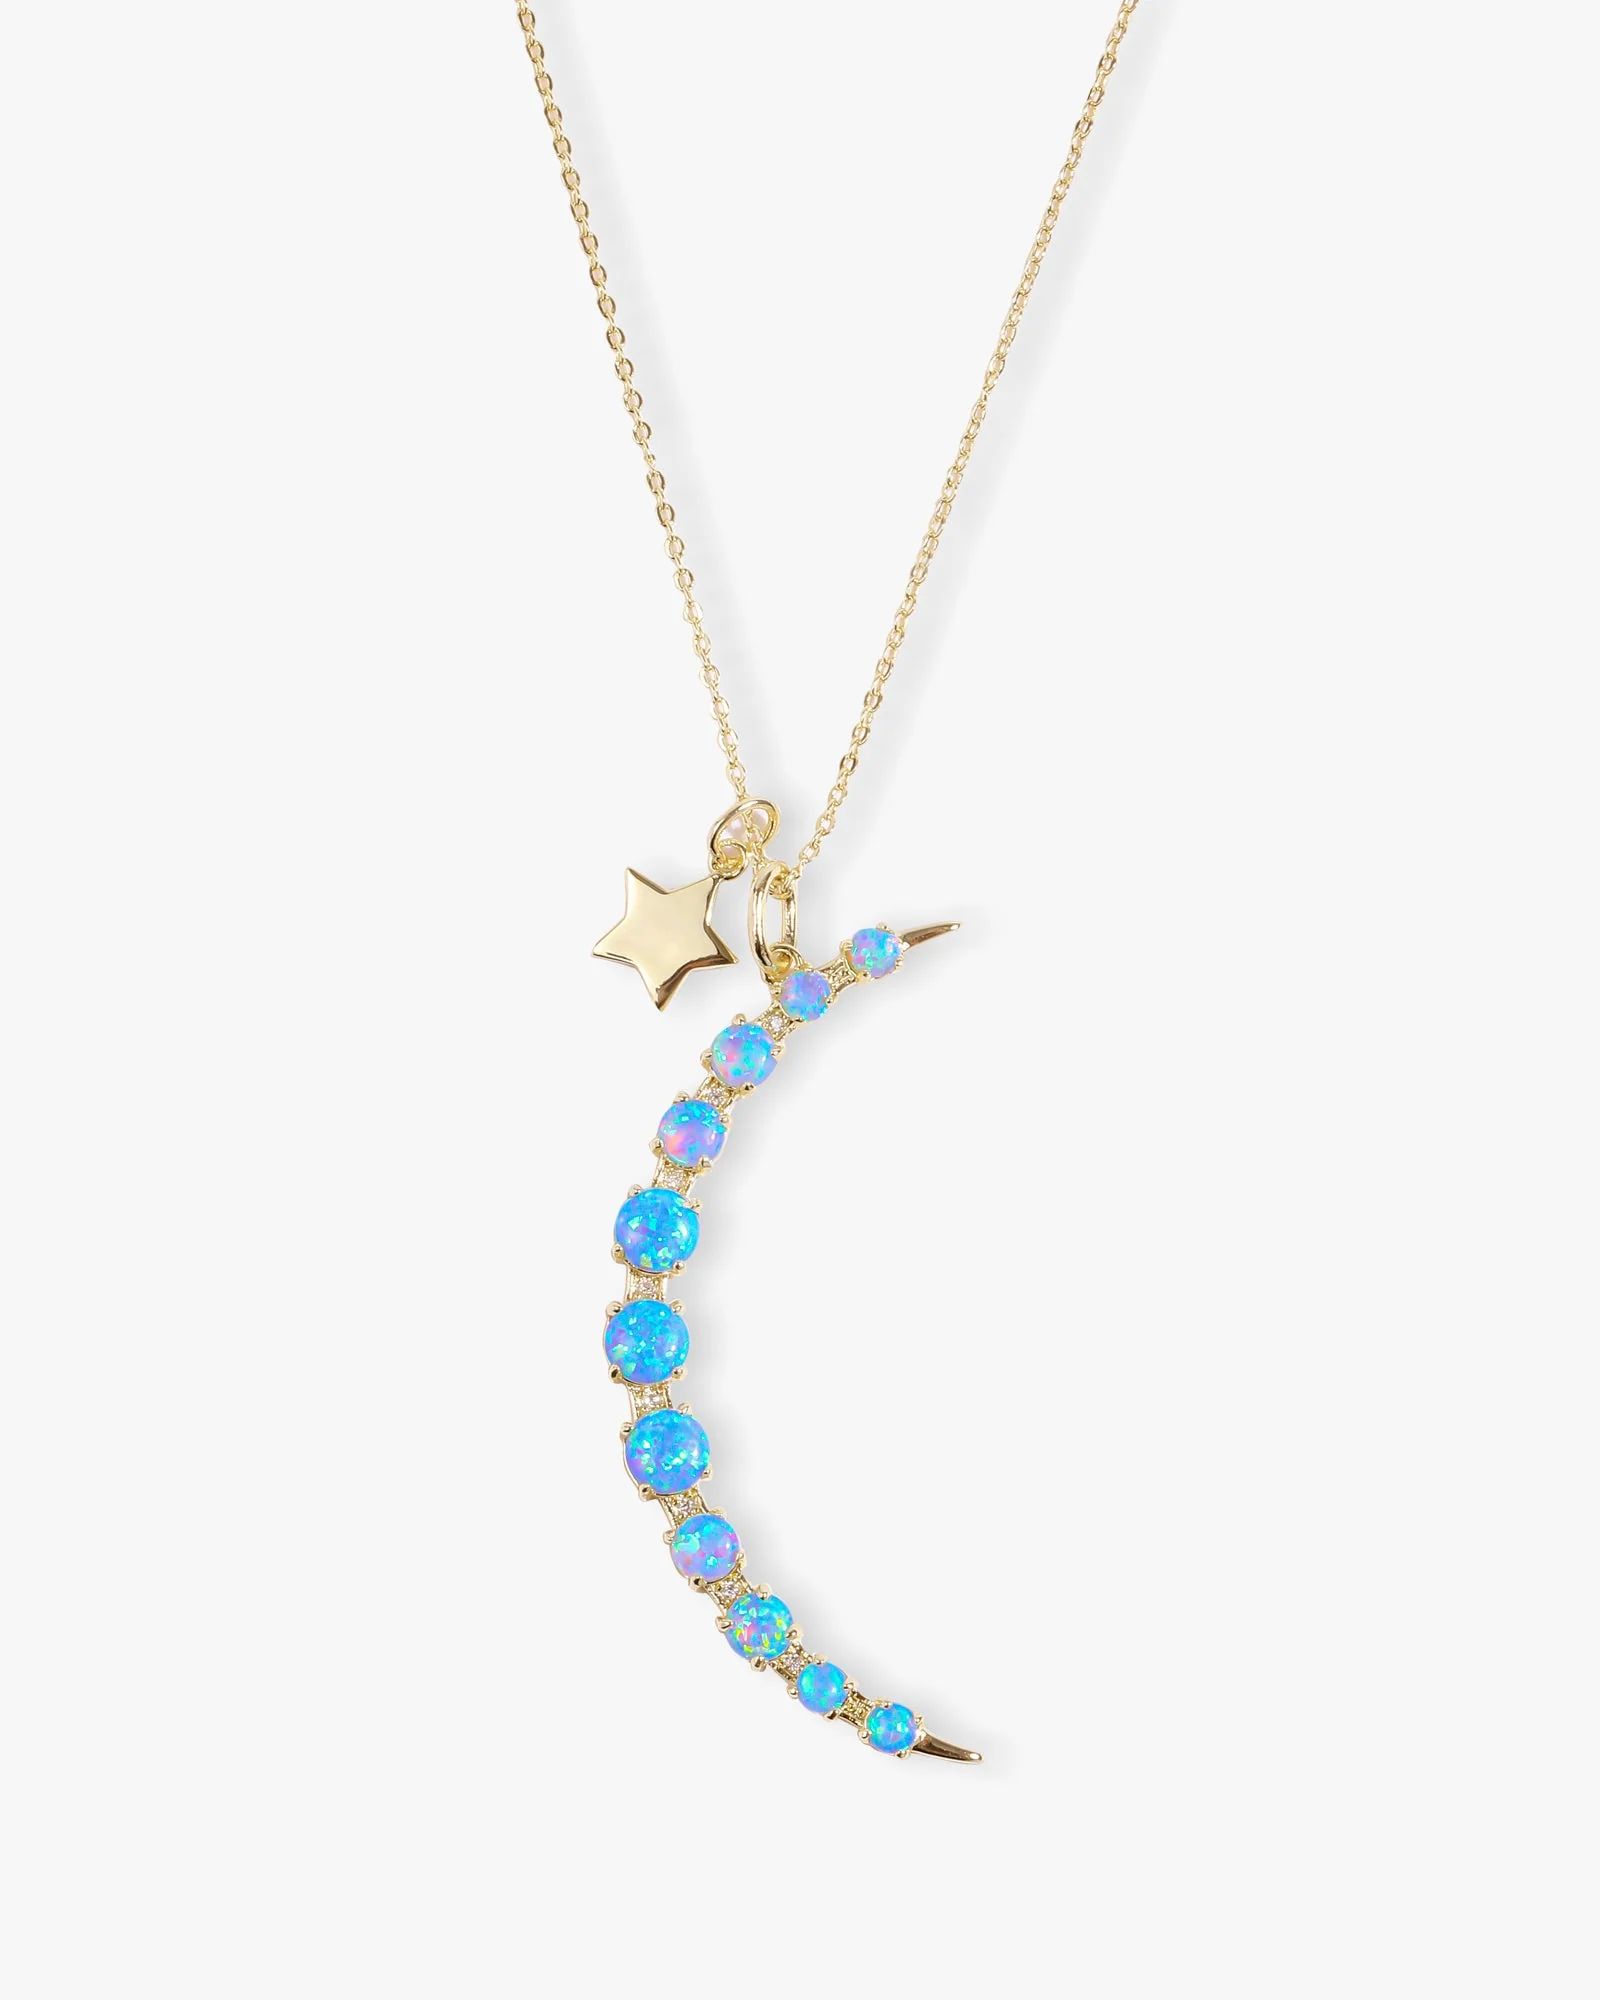 "What Dreams are Made of" Necklace - Gold|Blue Opal | Melinda Maria